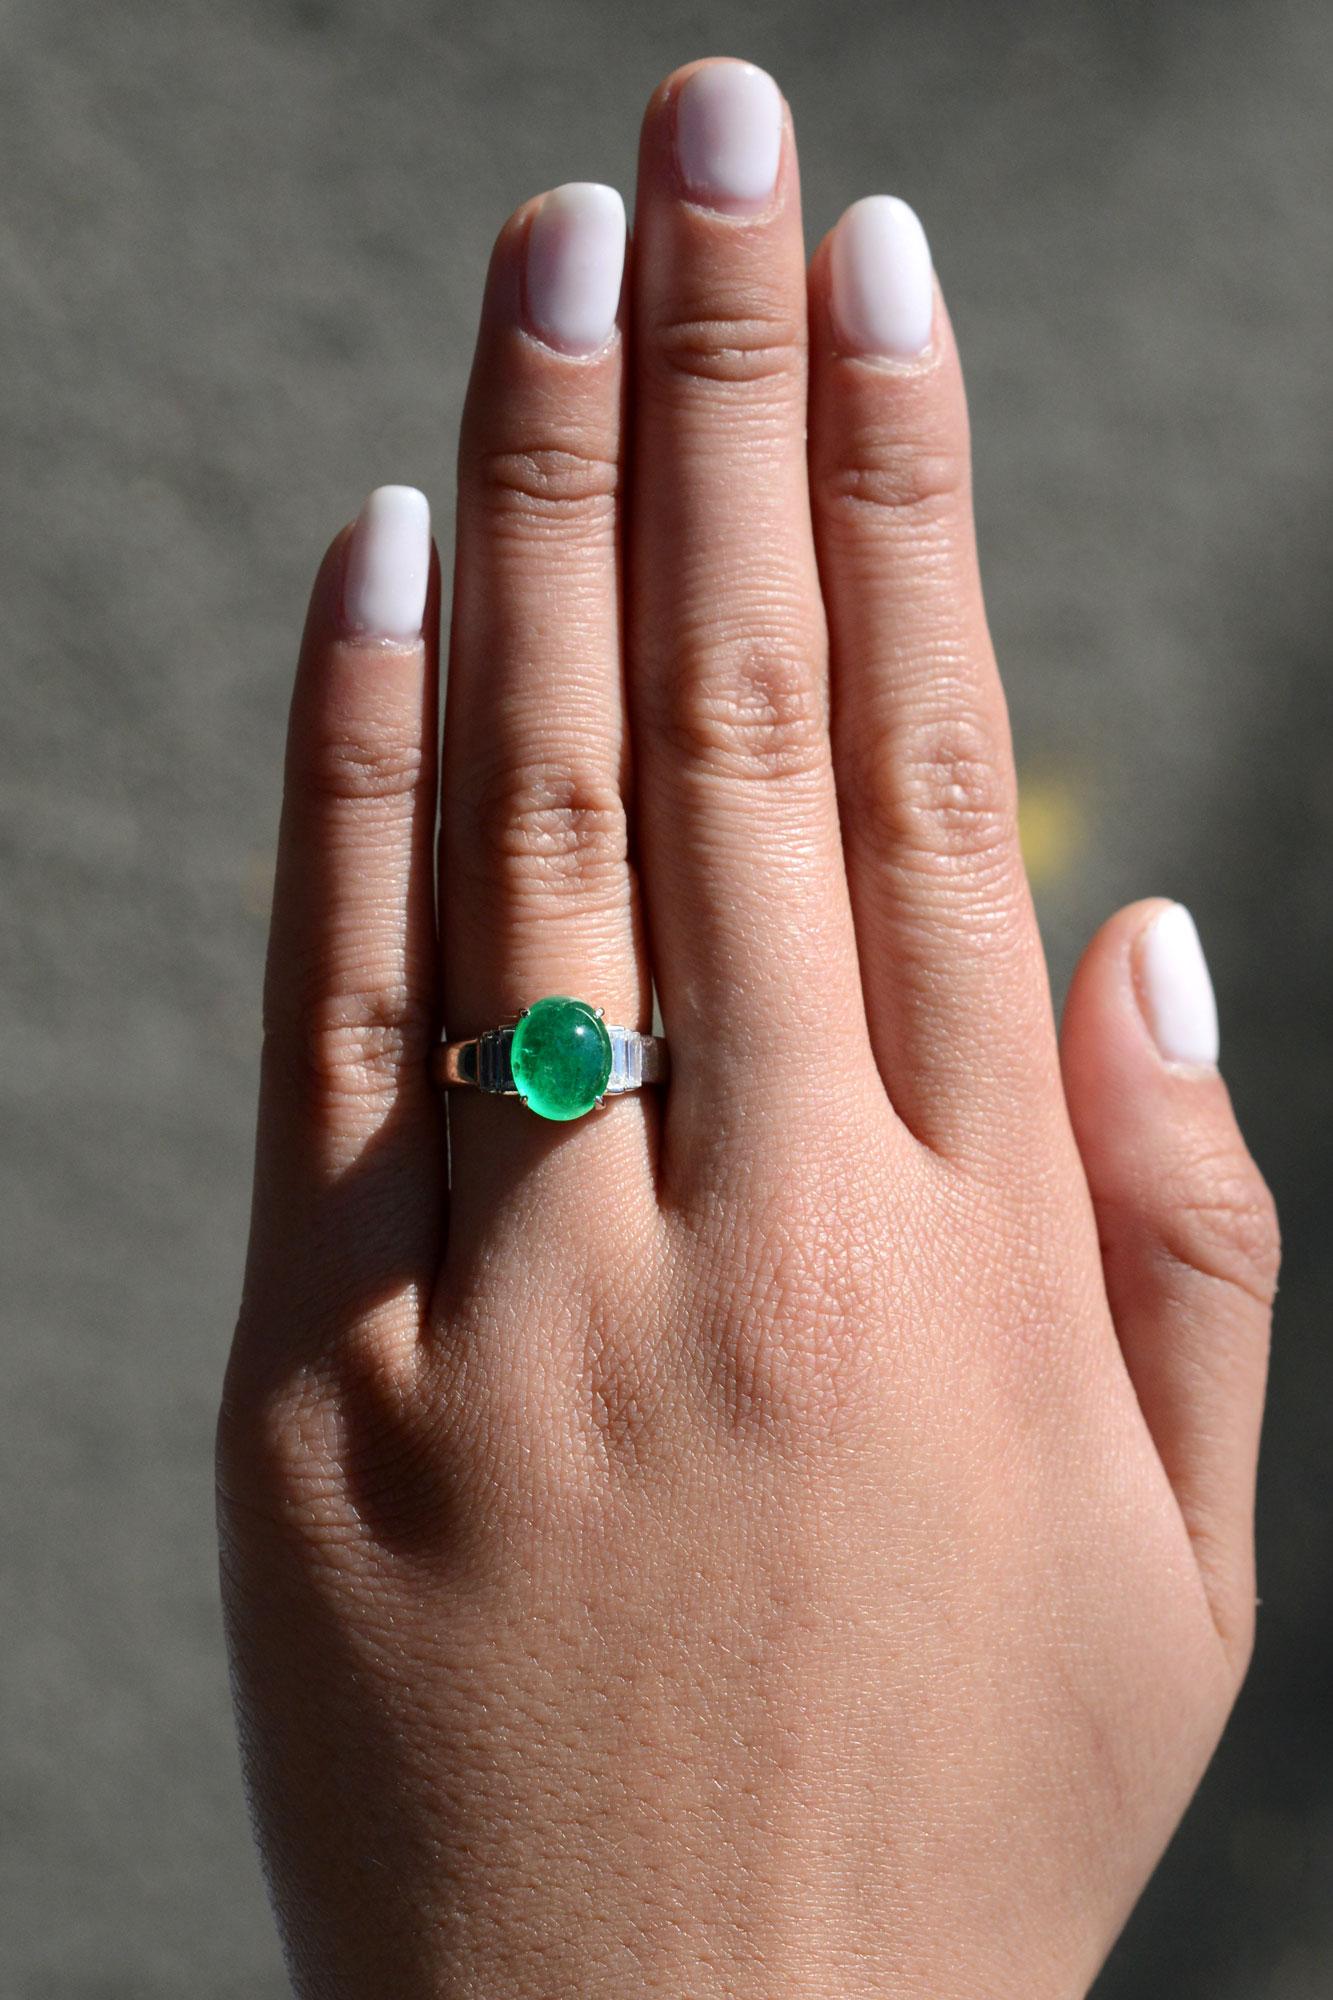 This classic Art Deco era gemstone engagement ring centers on a gorgeous 3 carat Colombian emerald cabochon with an intense, vivid green full of life. The term 